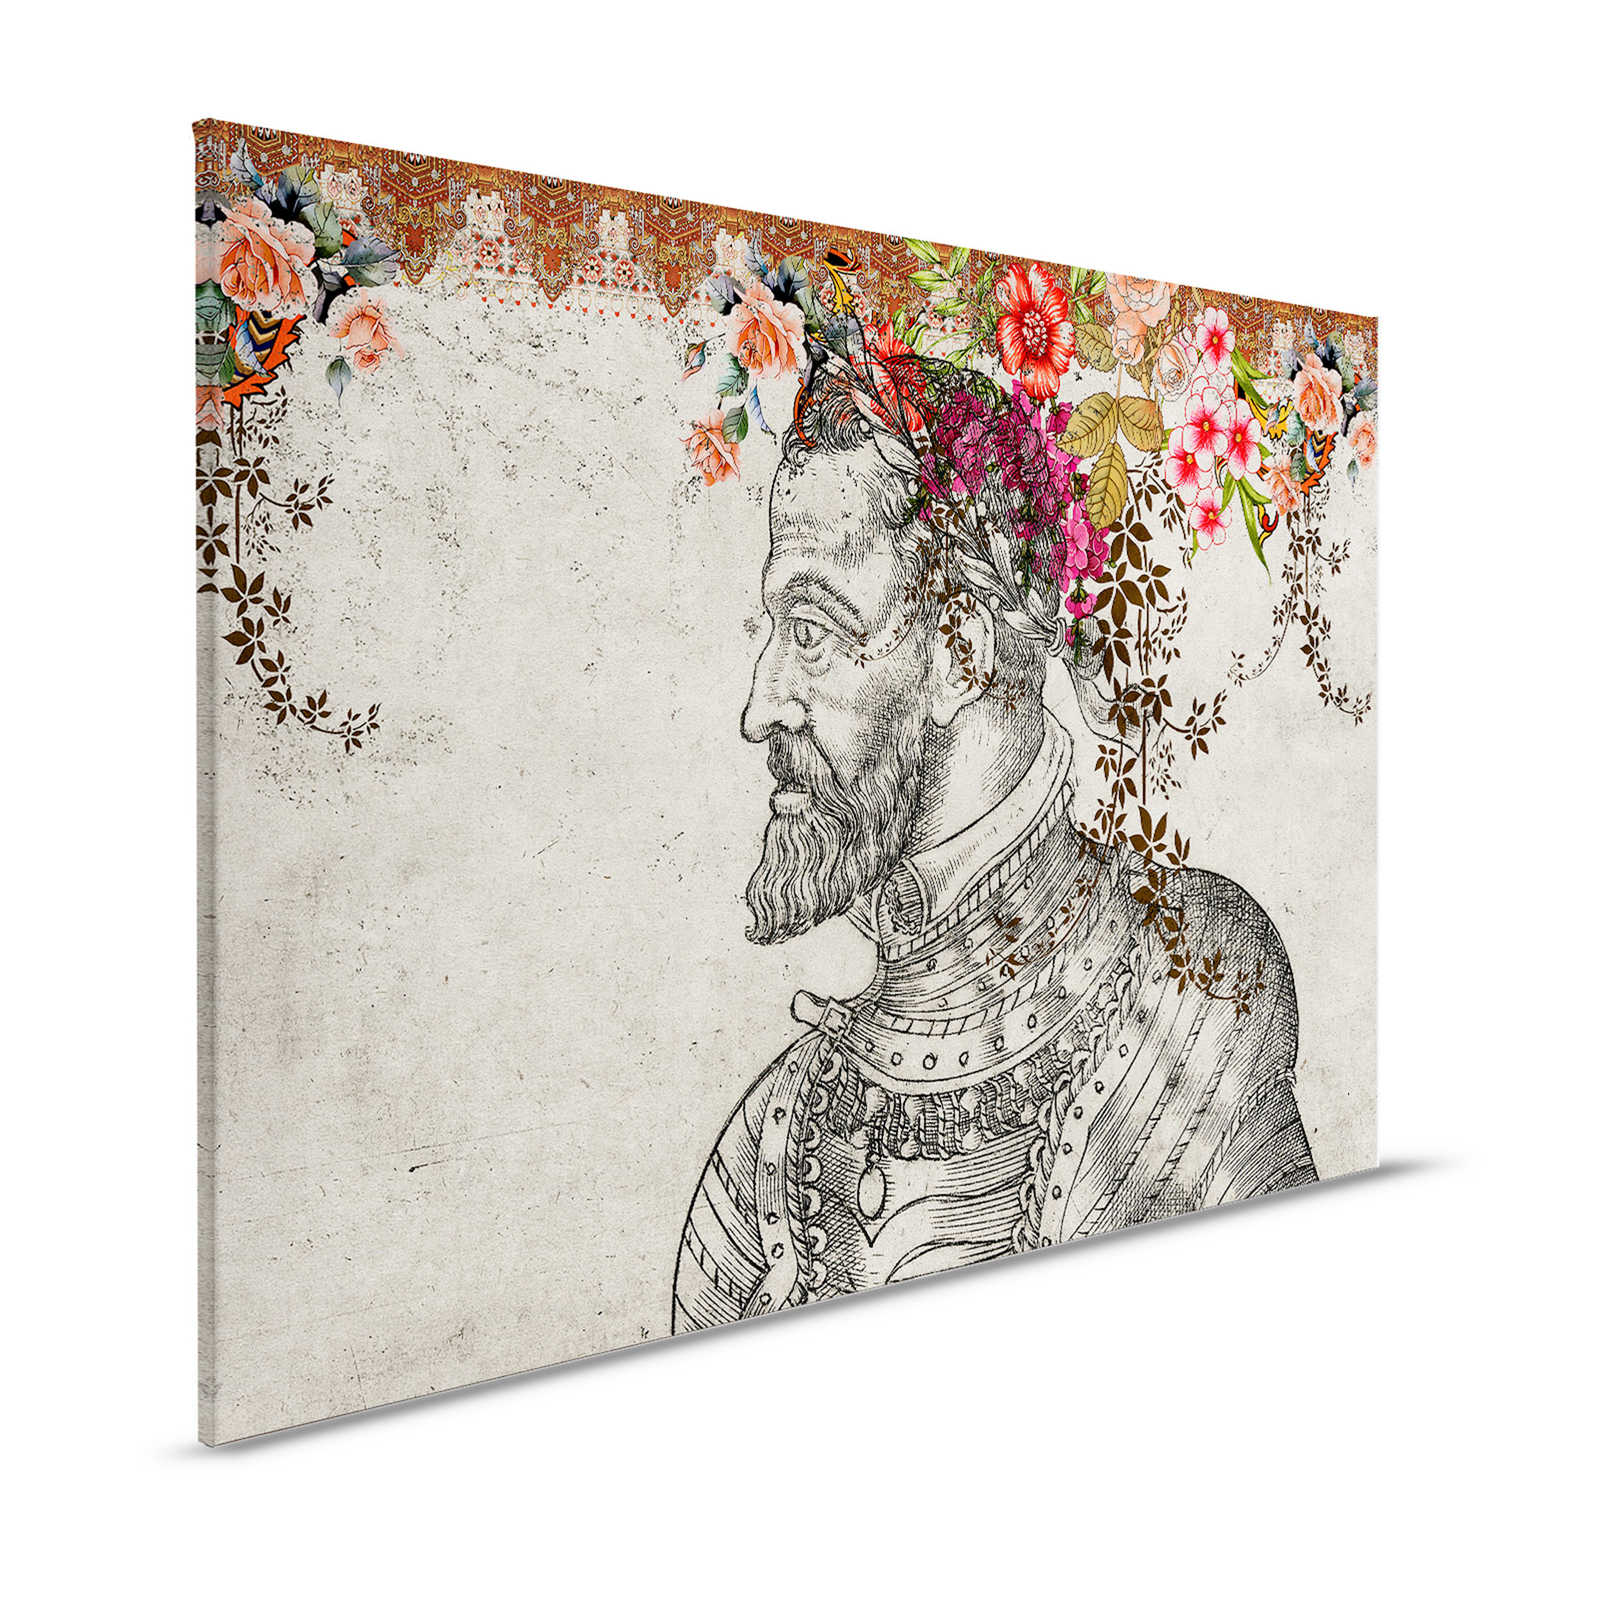 In the Gallery 2 - Canvas painting Historic Sketch & Floral Design - 1.20 m x 0.80 m
